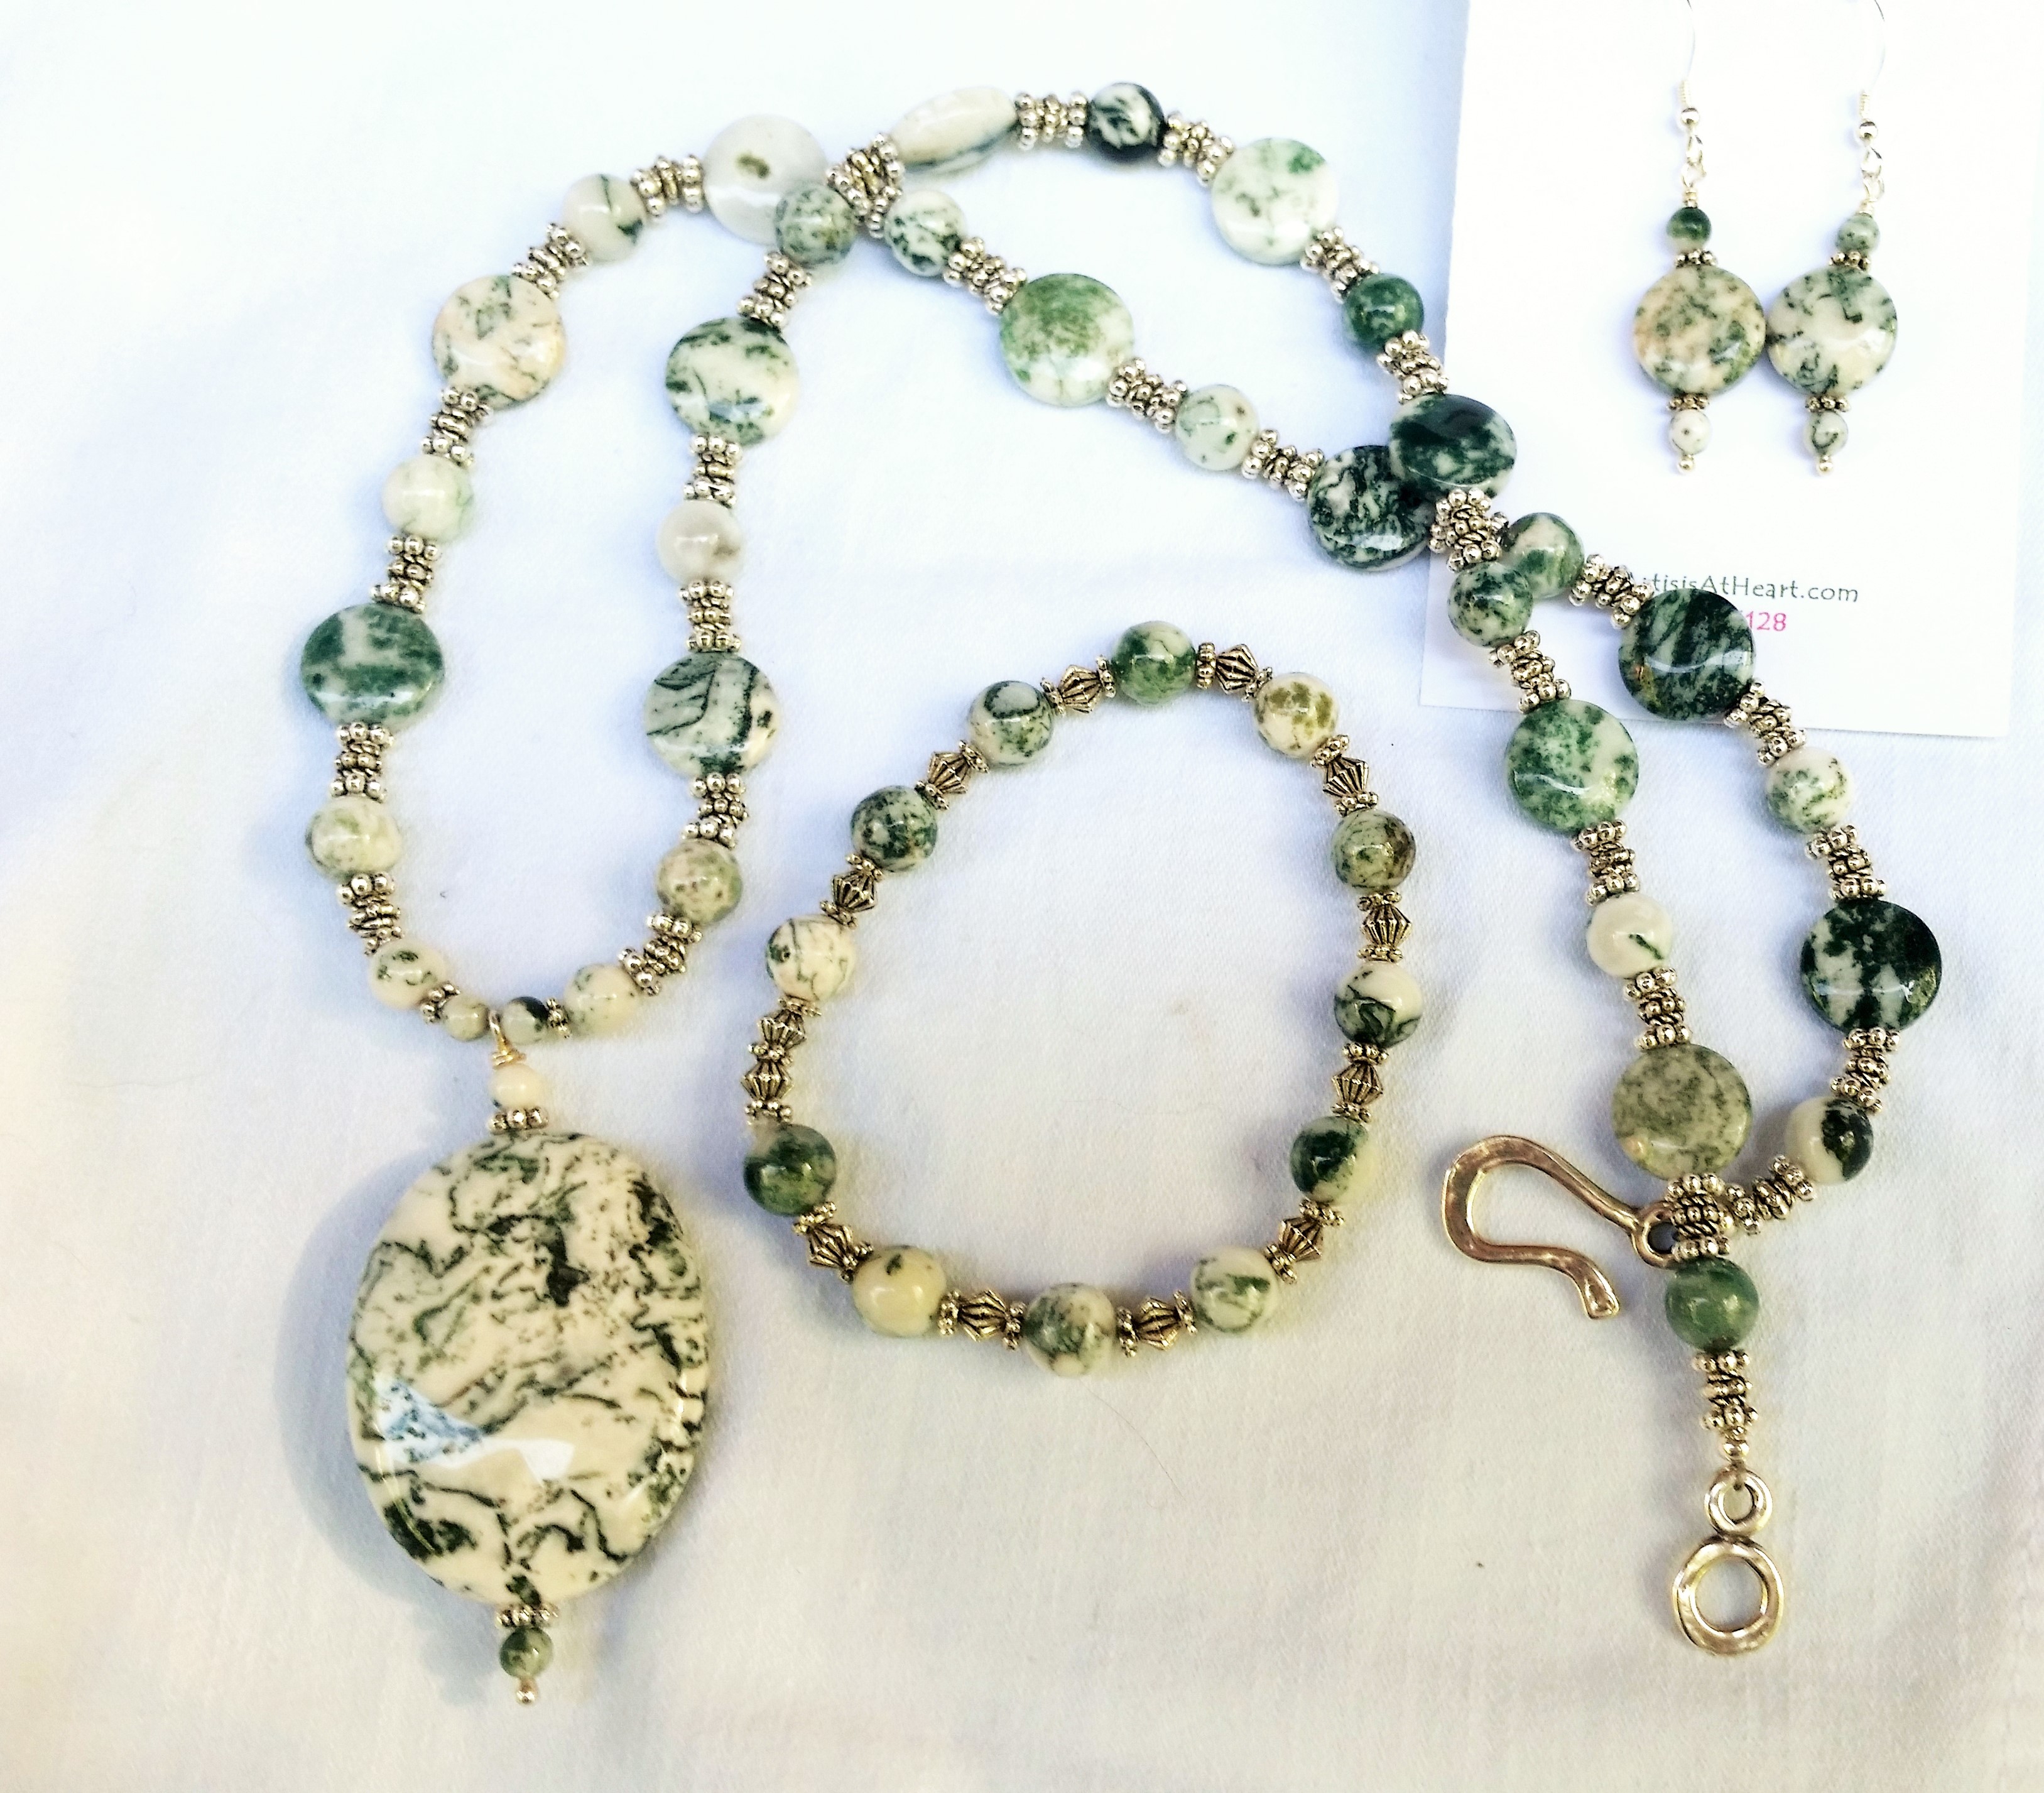 Green Agate Necklace, Earrings and Bracelet